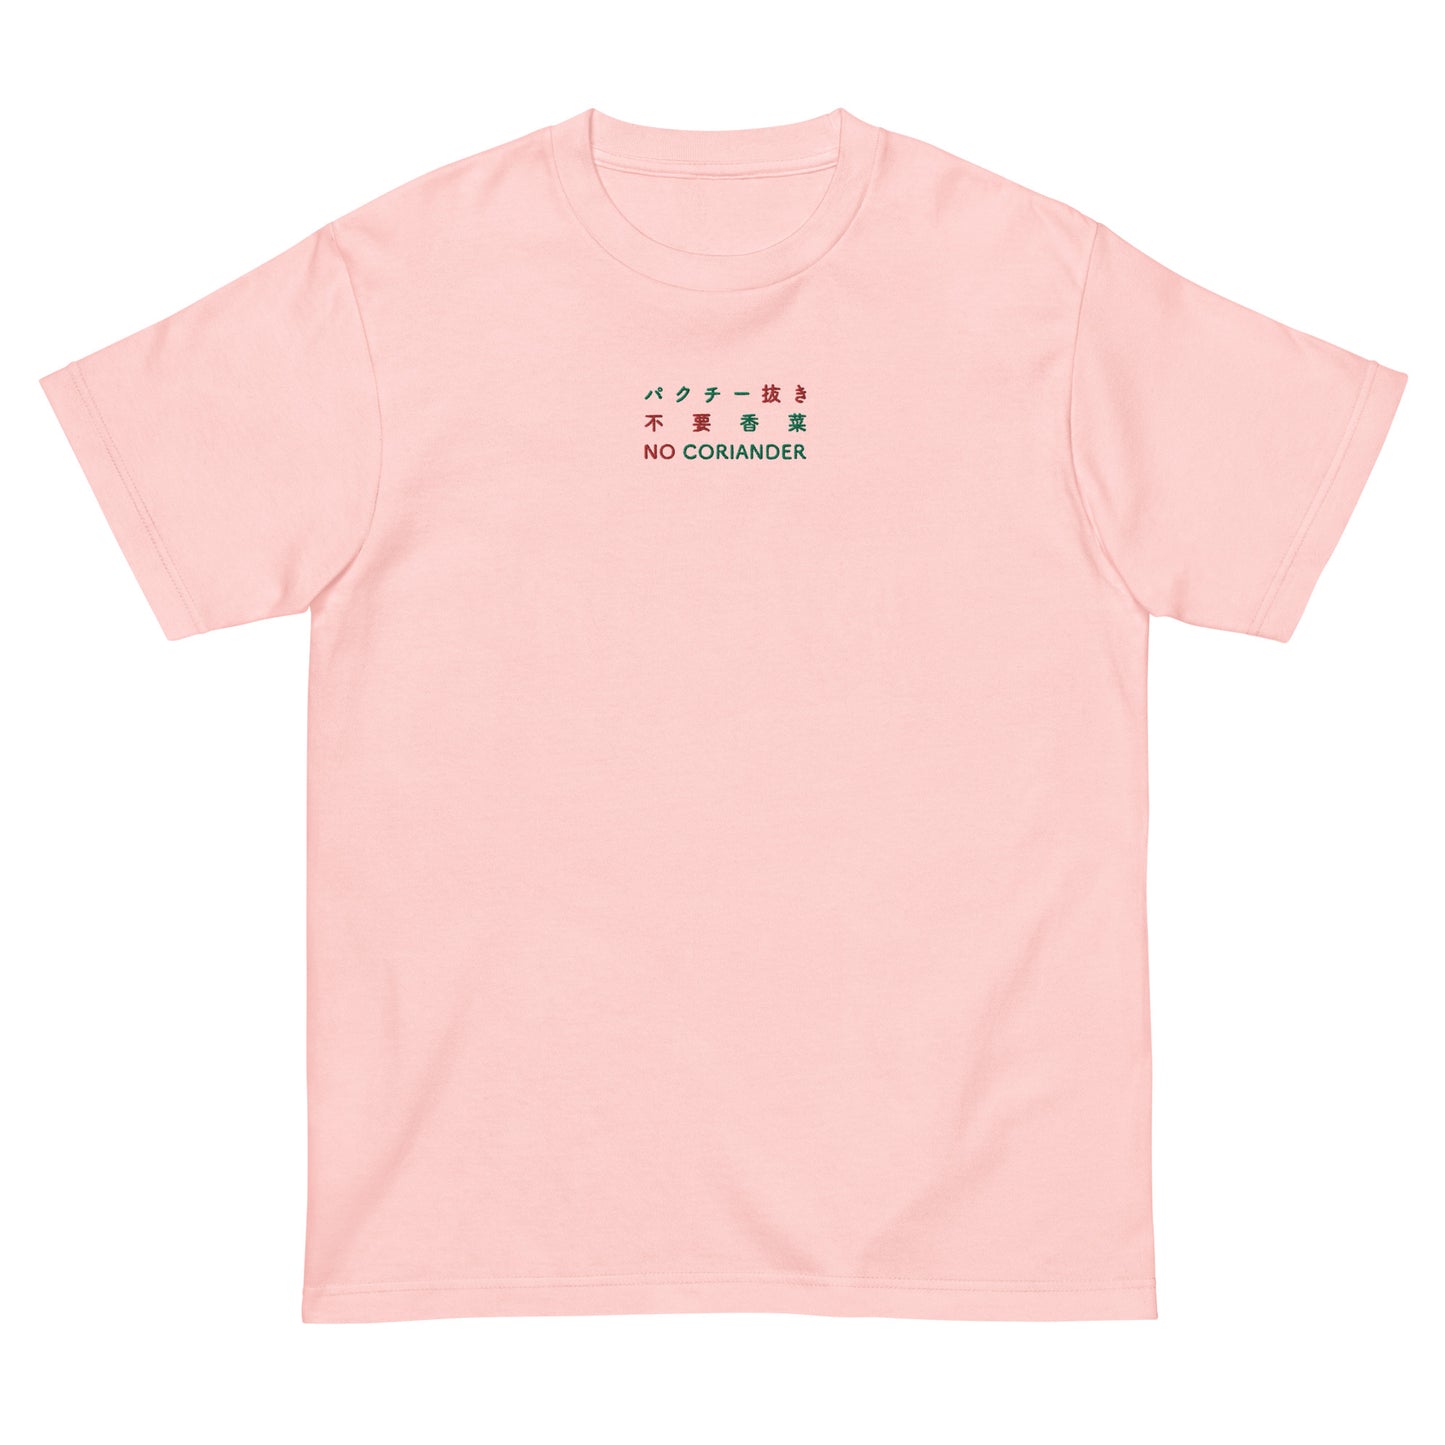 Light Pink High Quality Tee - Front Design with Red/Green Embroidery "NO CORIANDER" in three languages